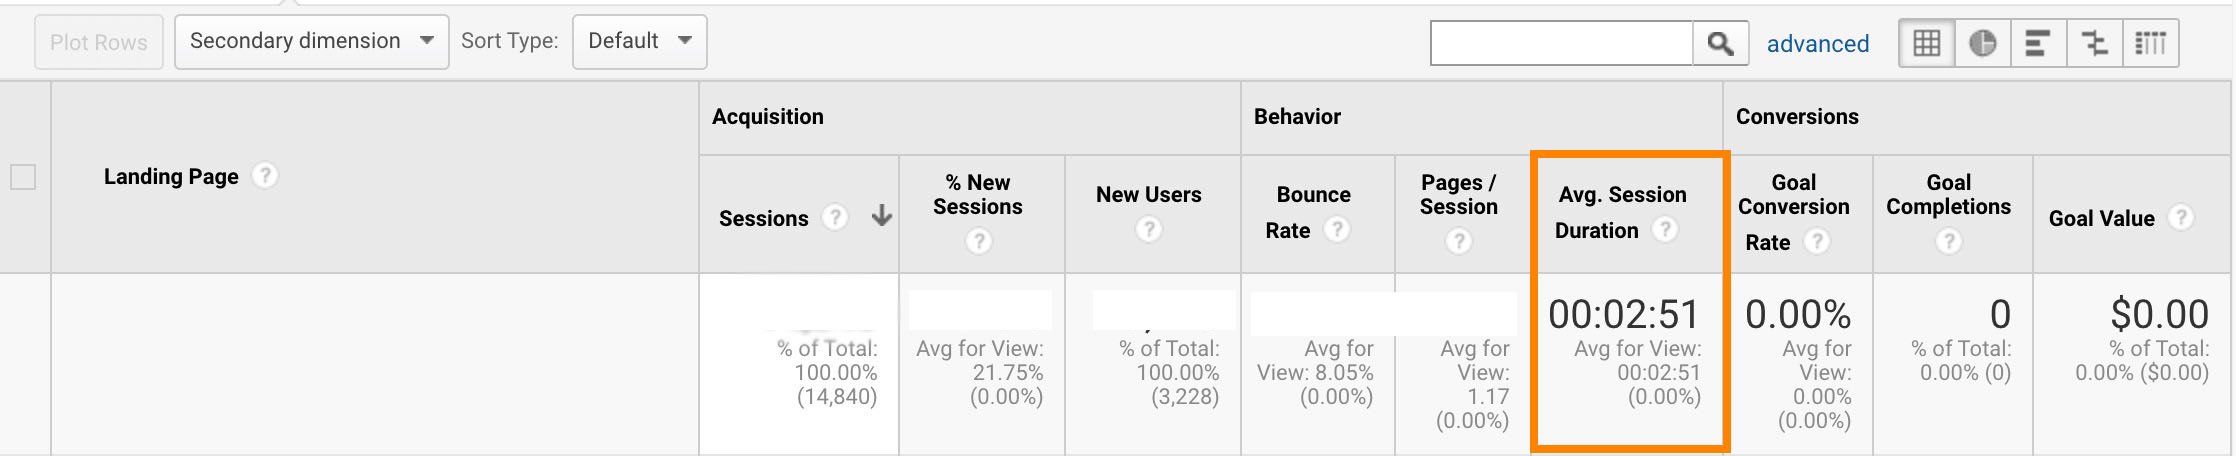 avg session duration for individual landing pages